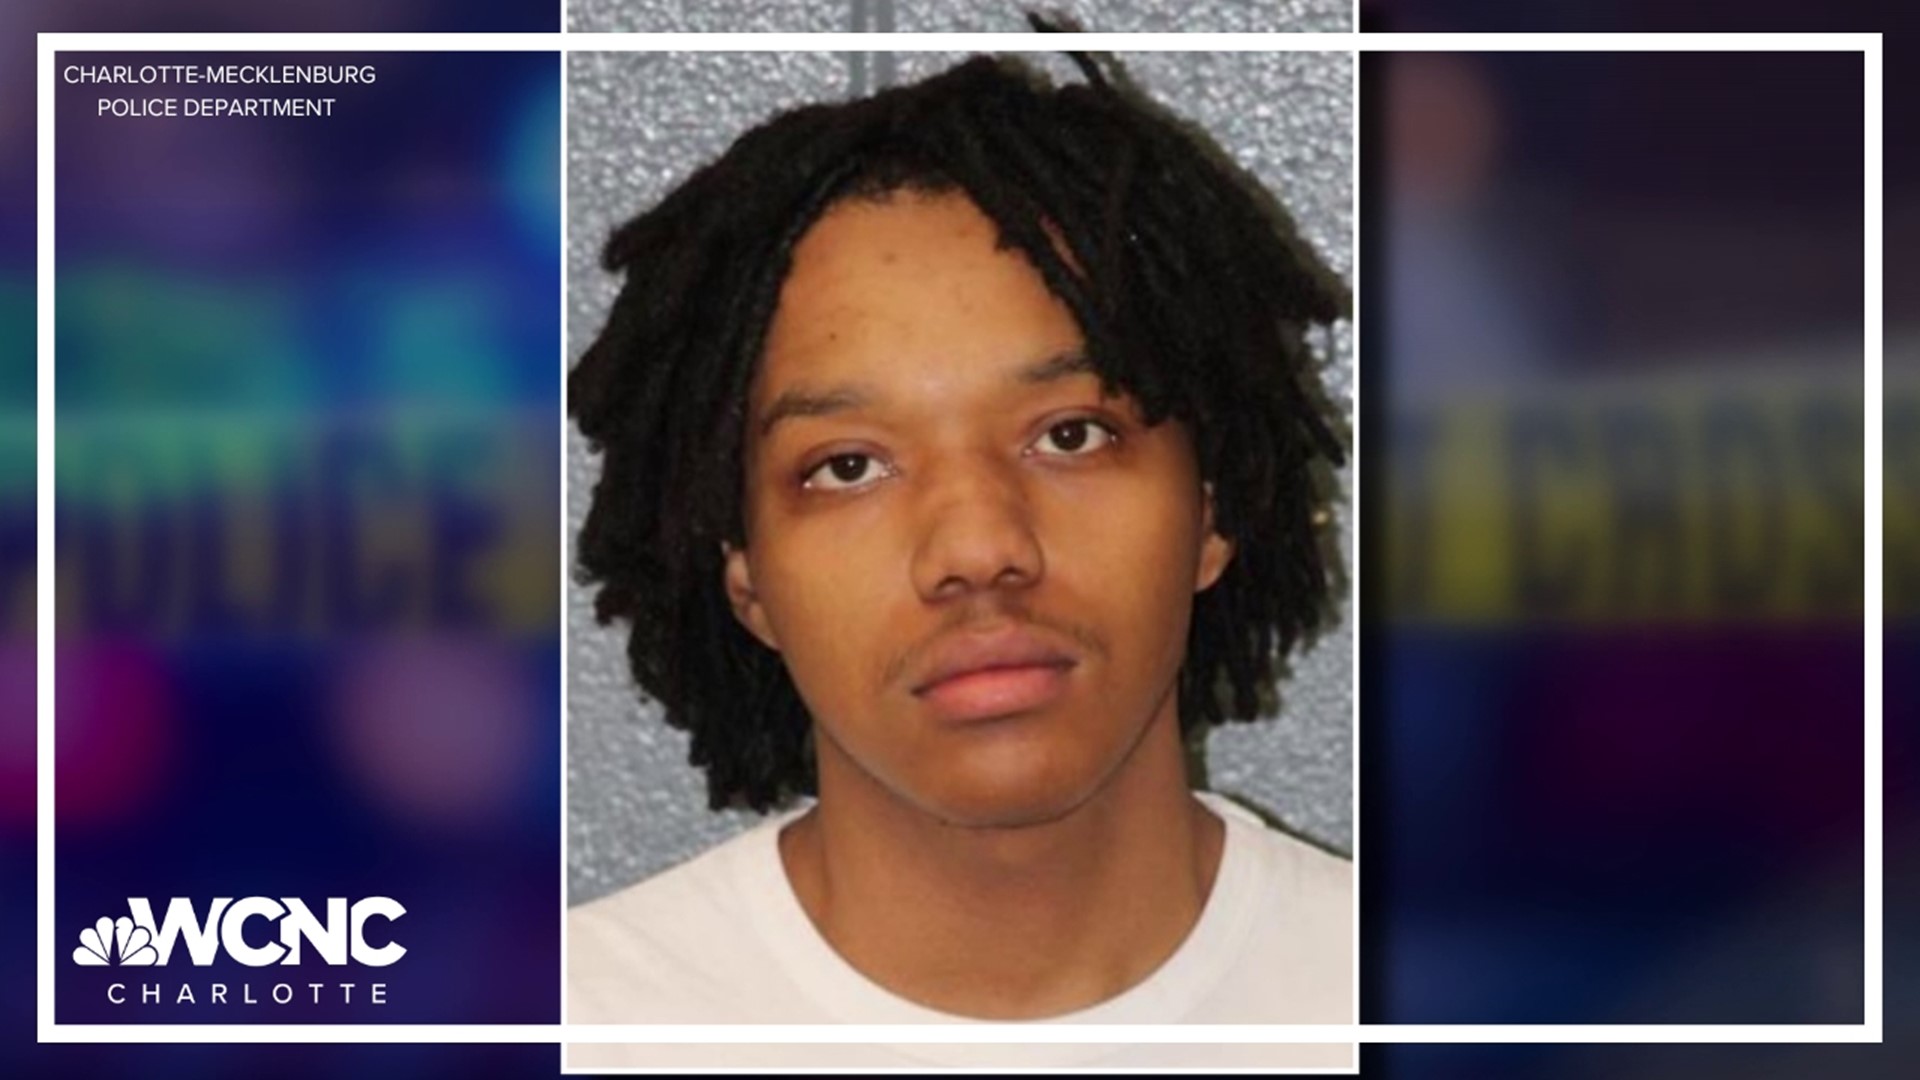 The suspect charged with opening fire at a New Year's Eve celebration was in court on Tuesday.